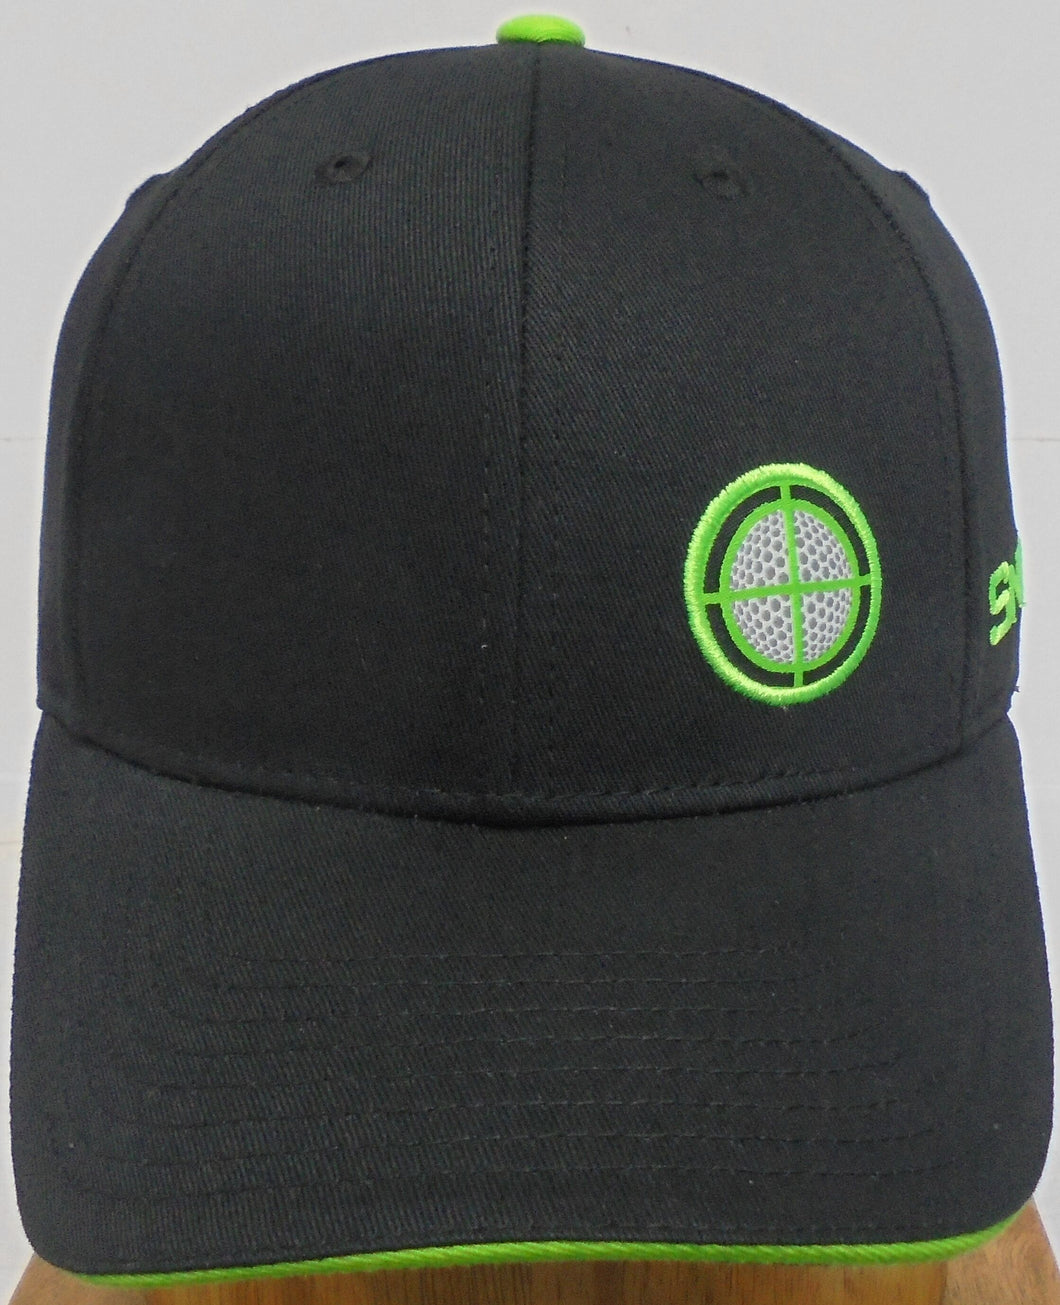 Special Clearance Price!! Black Sniper Hat